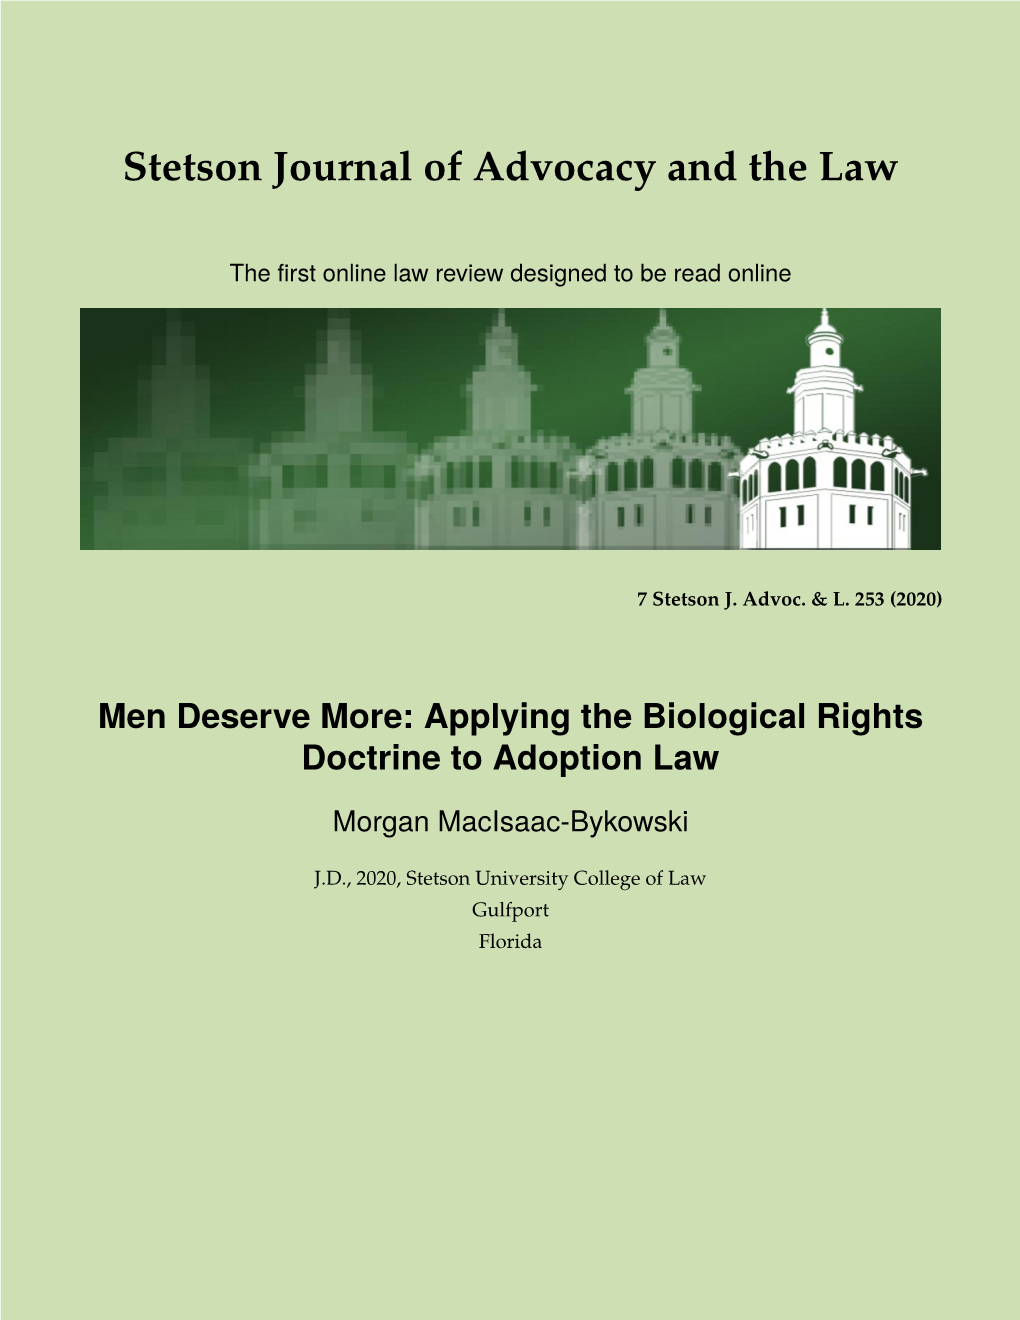 Applying the Biological Rights Doctrine to Adoption Law